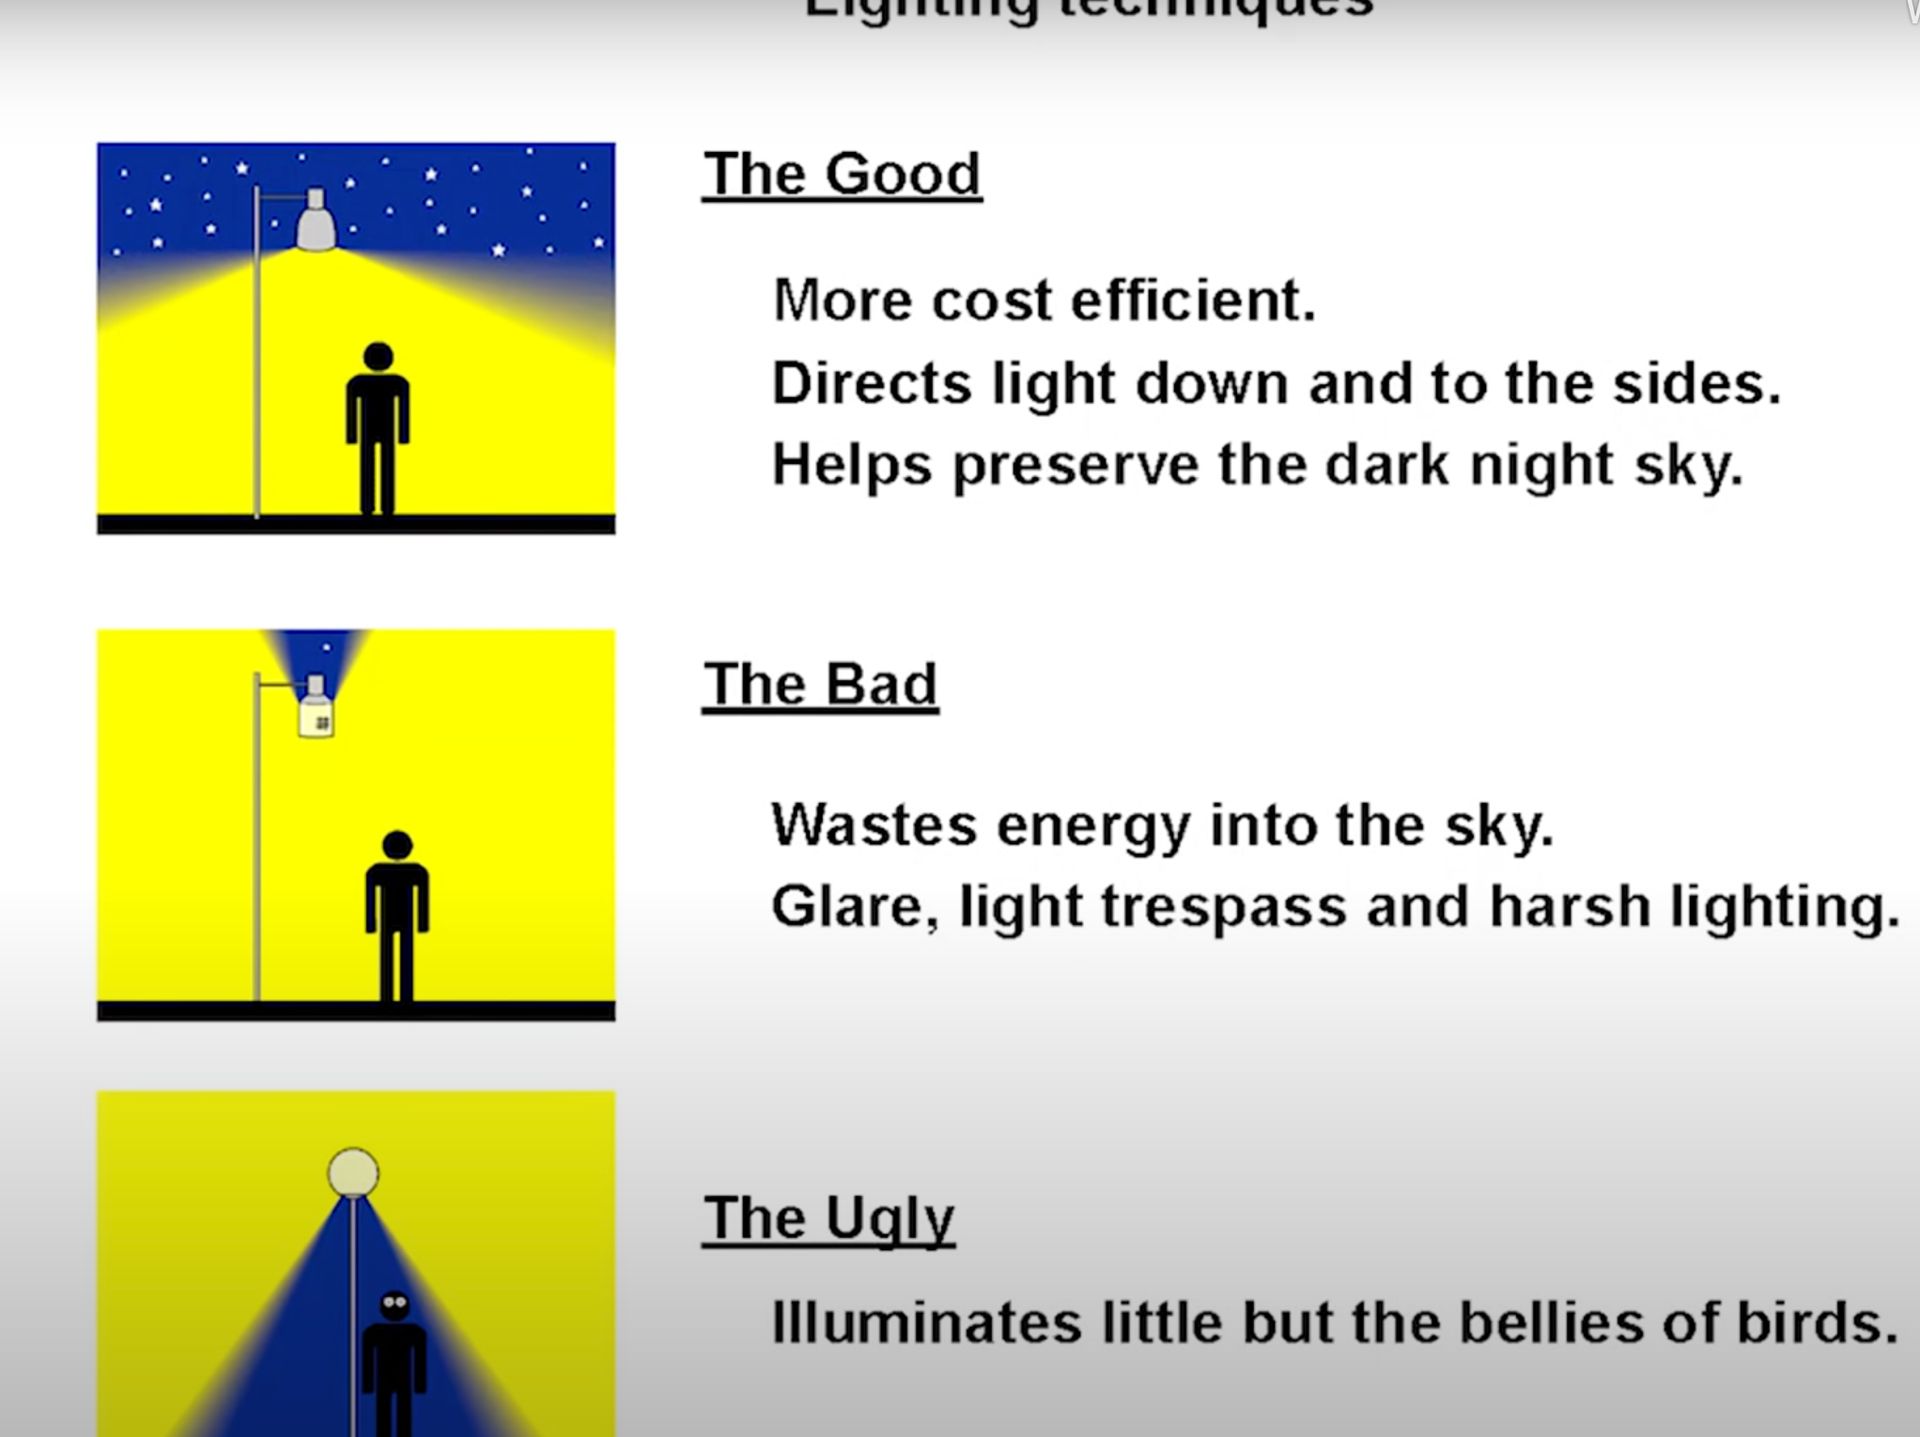 The Good
More cost efficient.
Directs light down and to the sides.
Helps preserve the dark night sky.
The Bad
Wastes energy into the sky.
Glare, light trespass and harsh lighting.
The Ugly
Illuminates little but the bellies of birds.